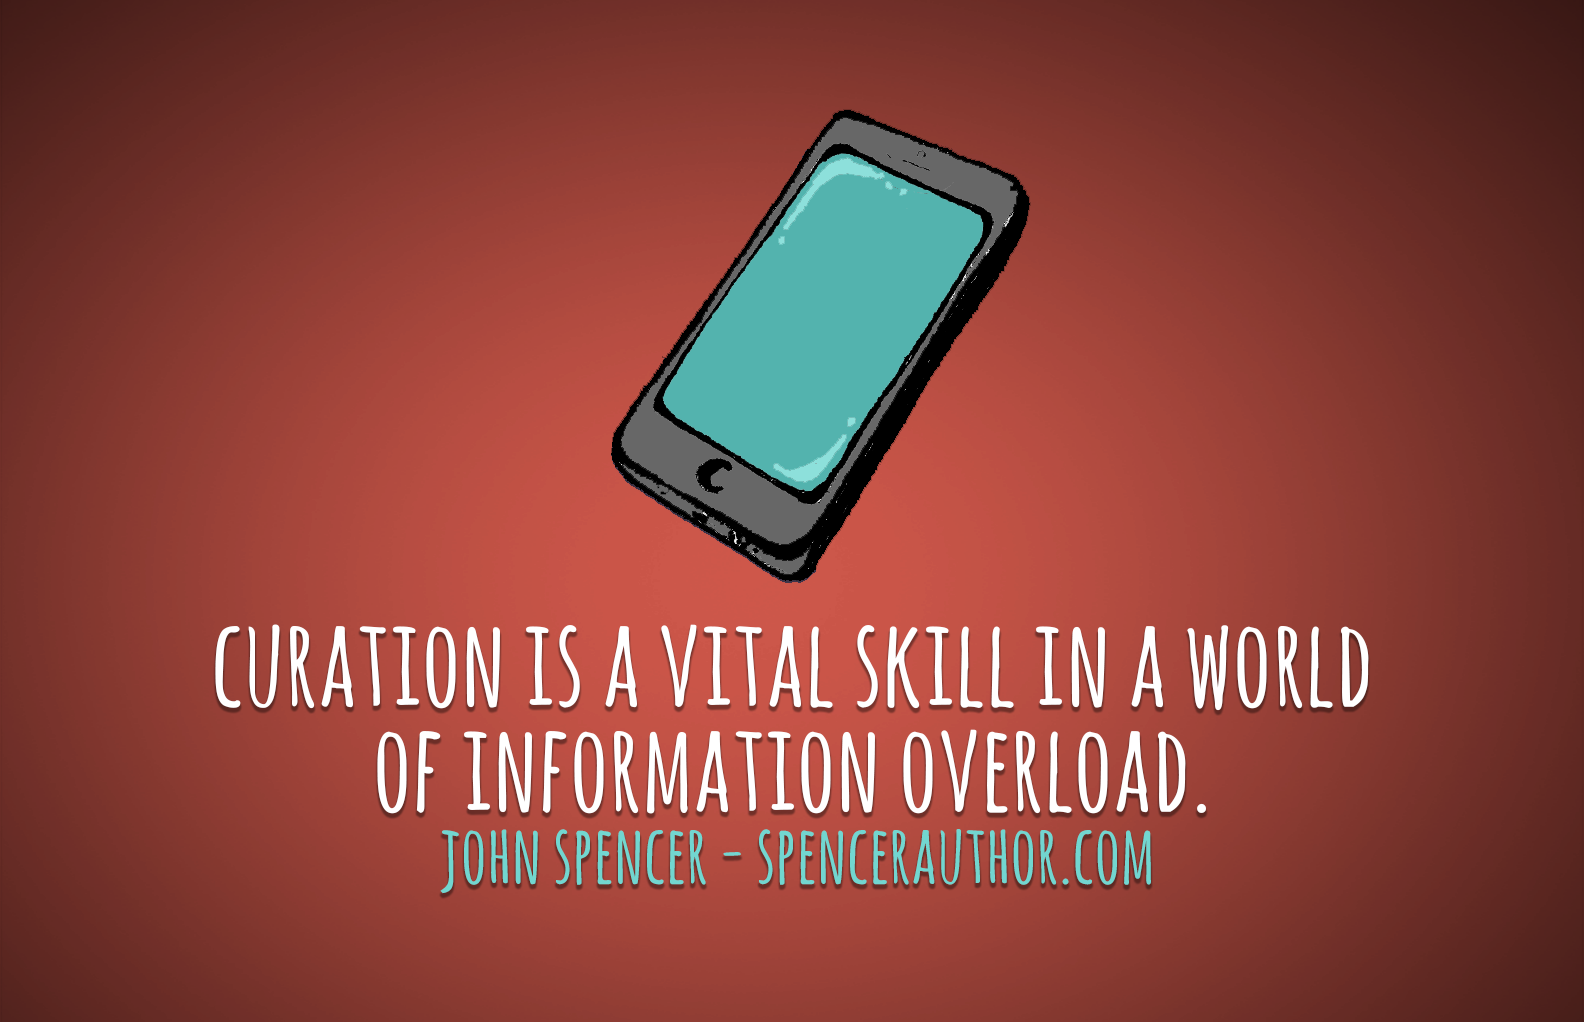 Learning to curate information for your classroom